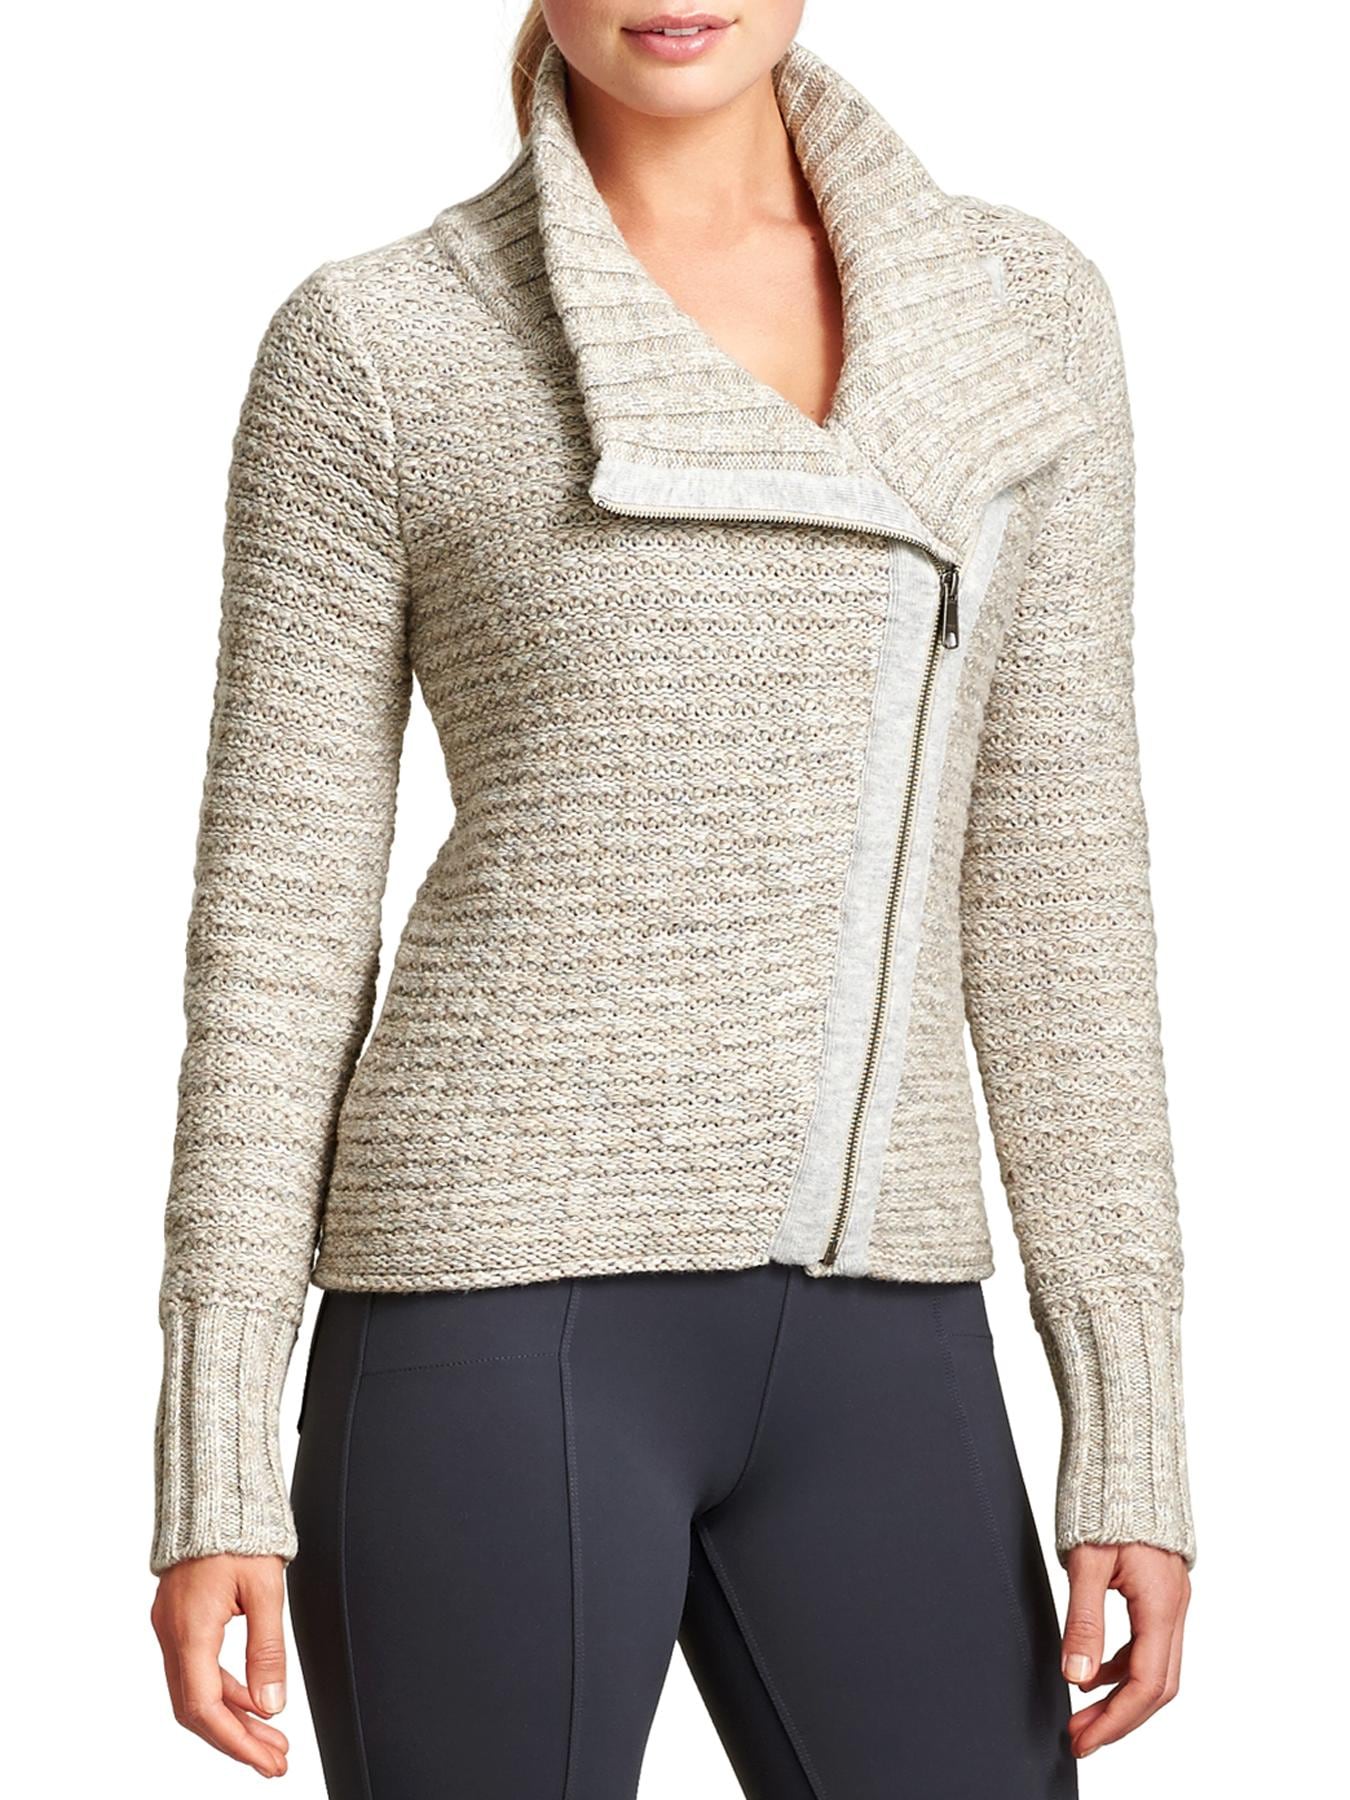 Chill Textured Sweater Jacket